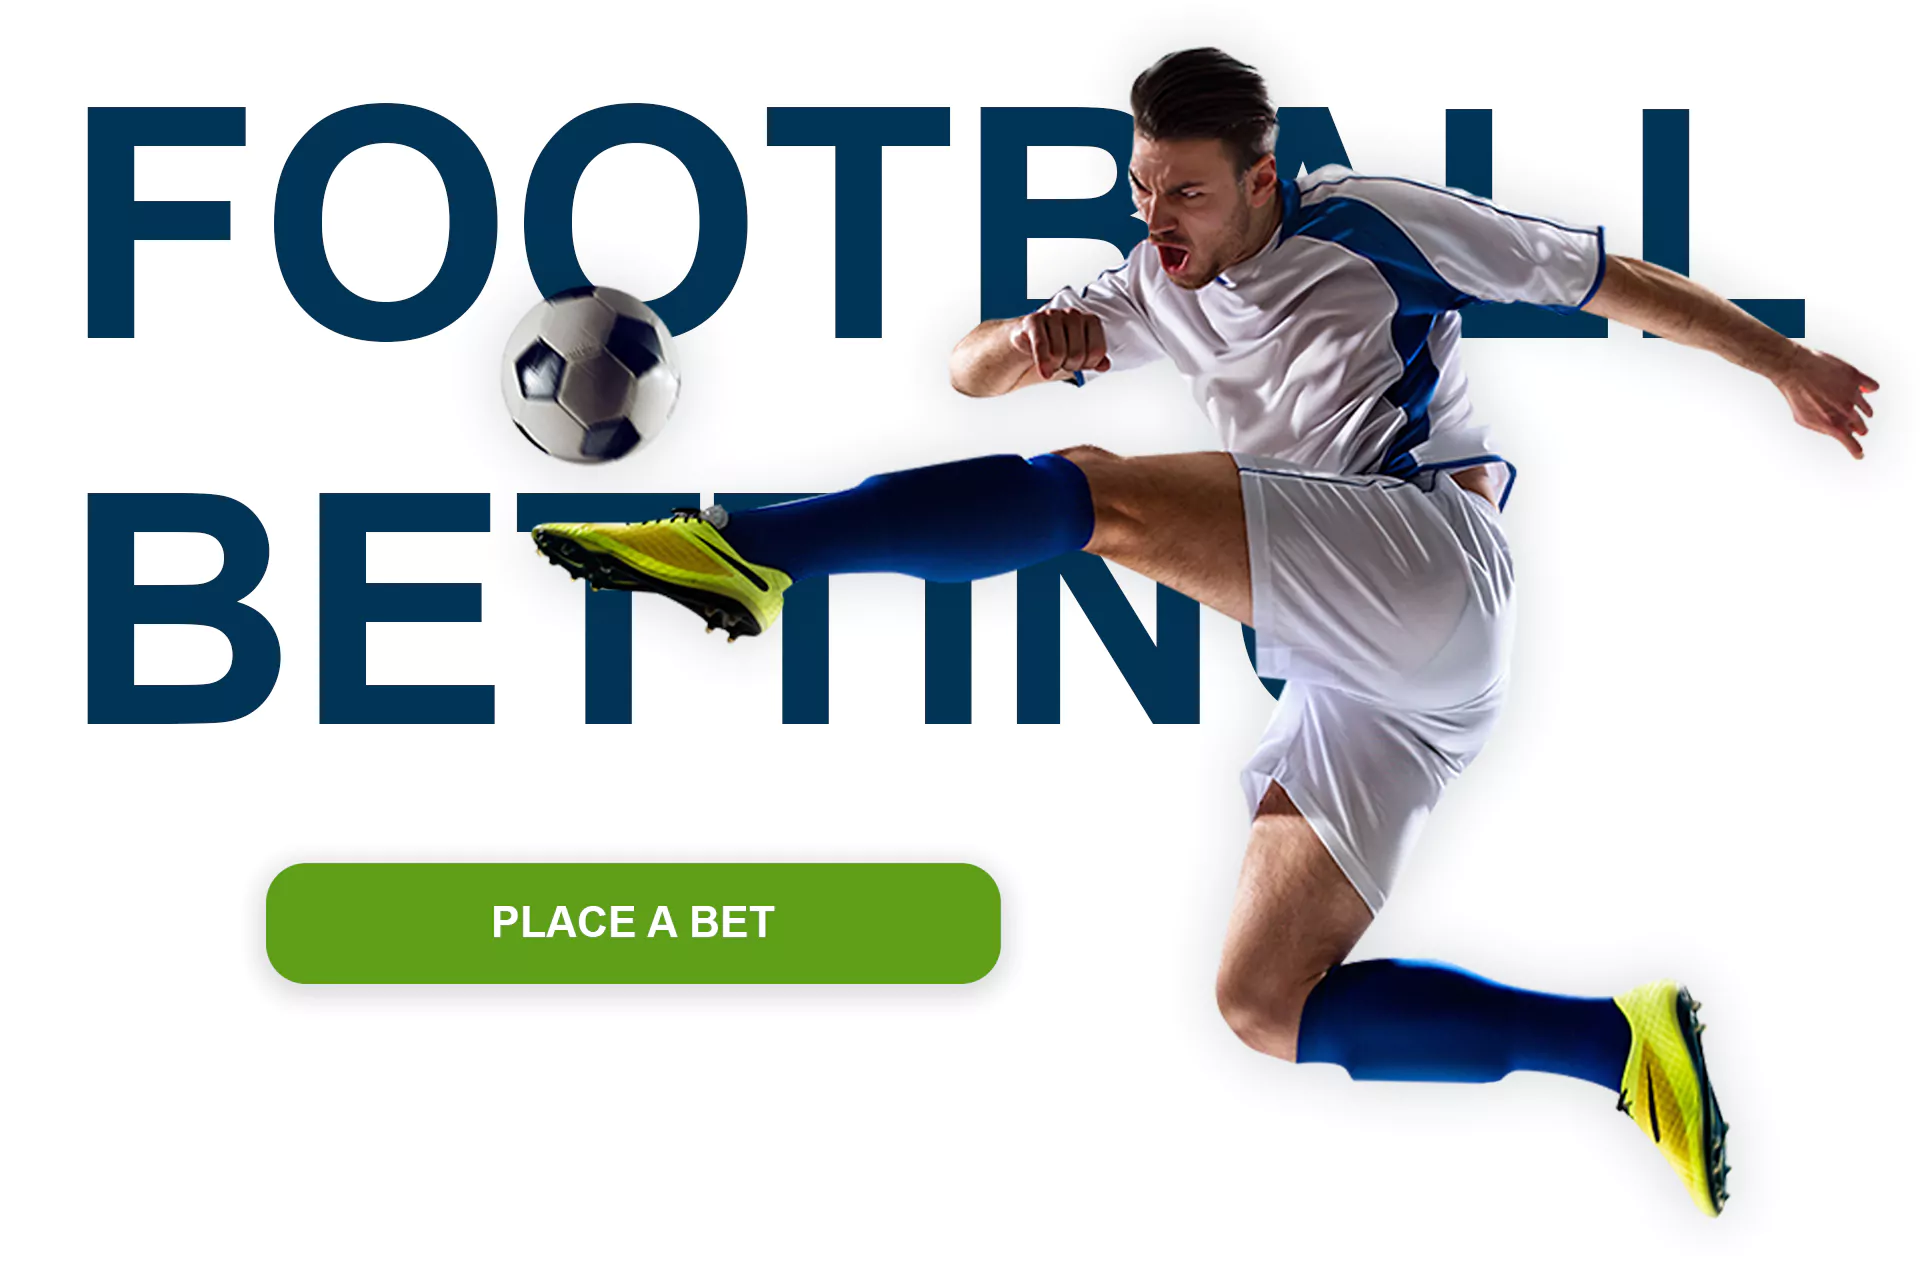 Bet on football online on the official 1xBet website in Bangladesh.